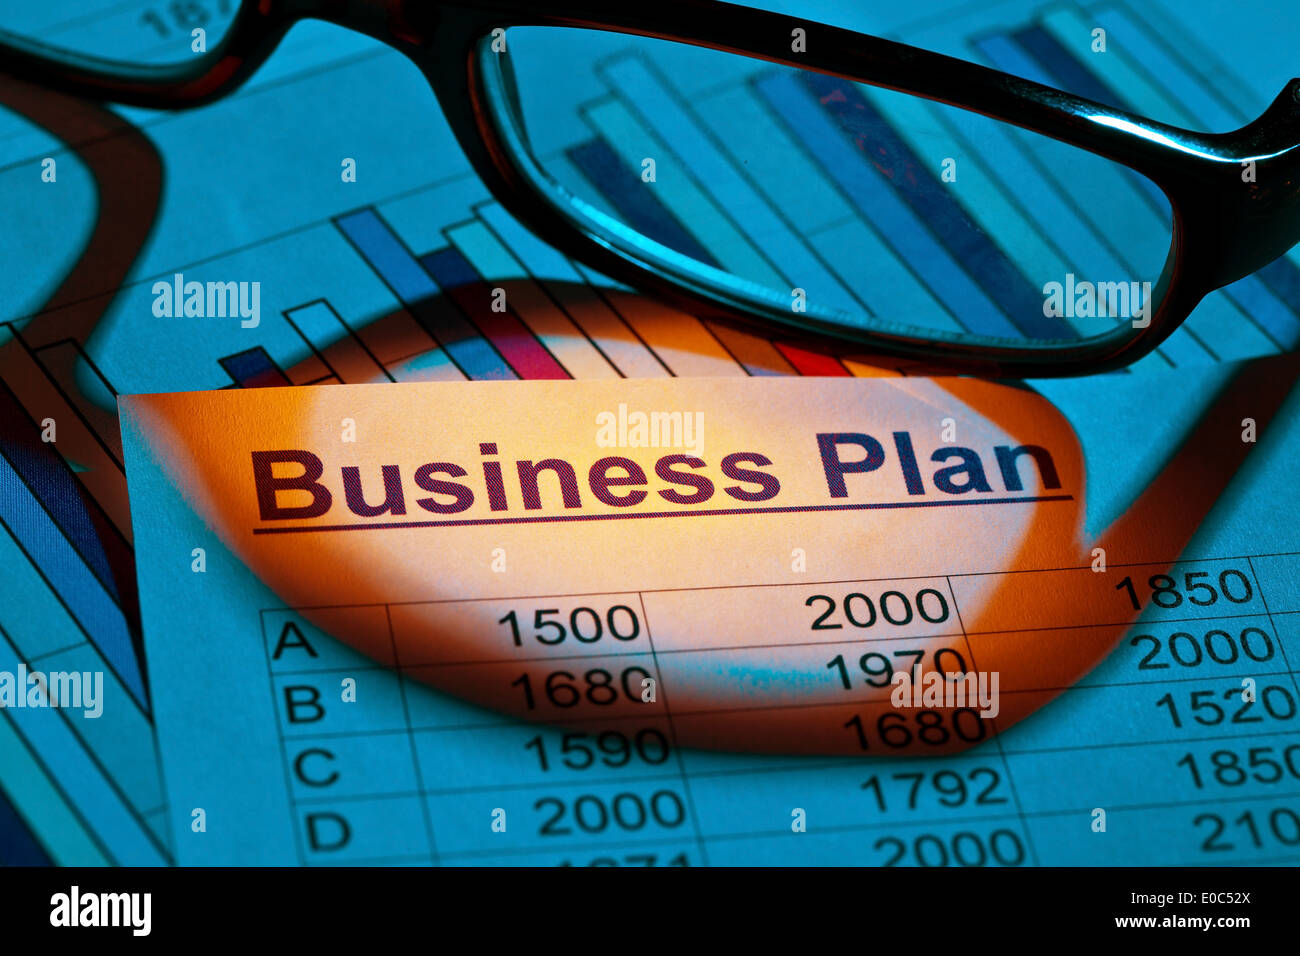 Business plan business commercial plan Startup existence founder of a new business existence foundation financing appropriations Stock Photo